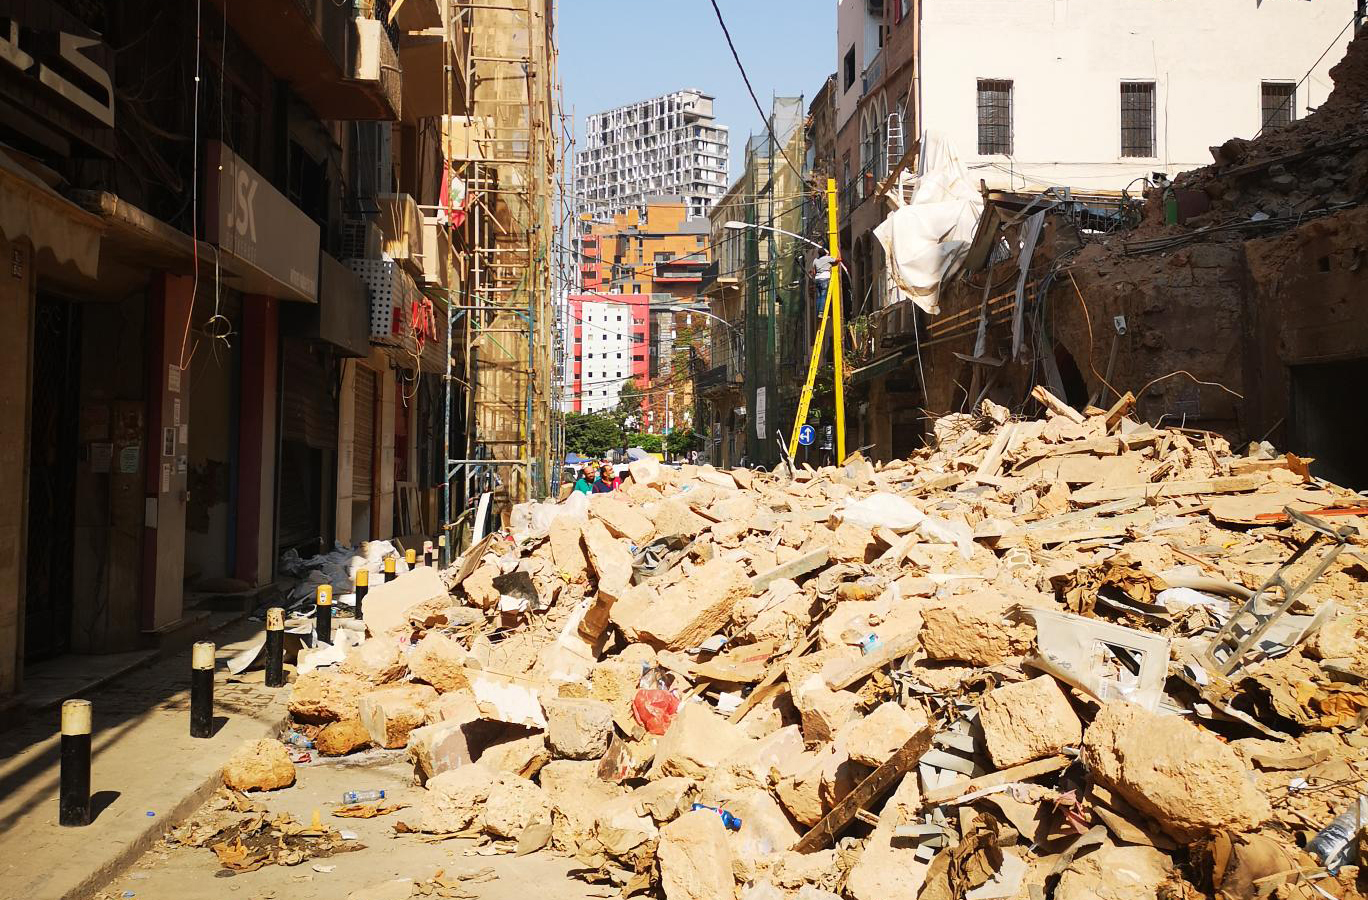 Stories of shock and survival: Three months after the Beirut explosion